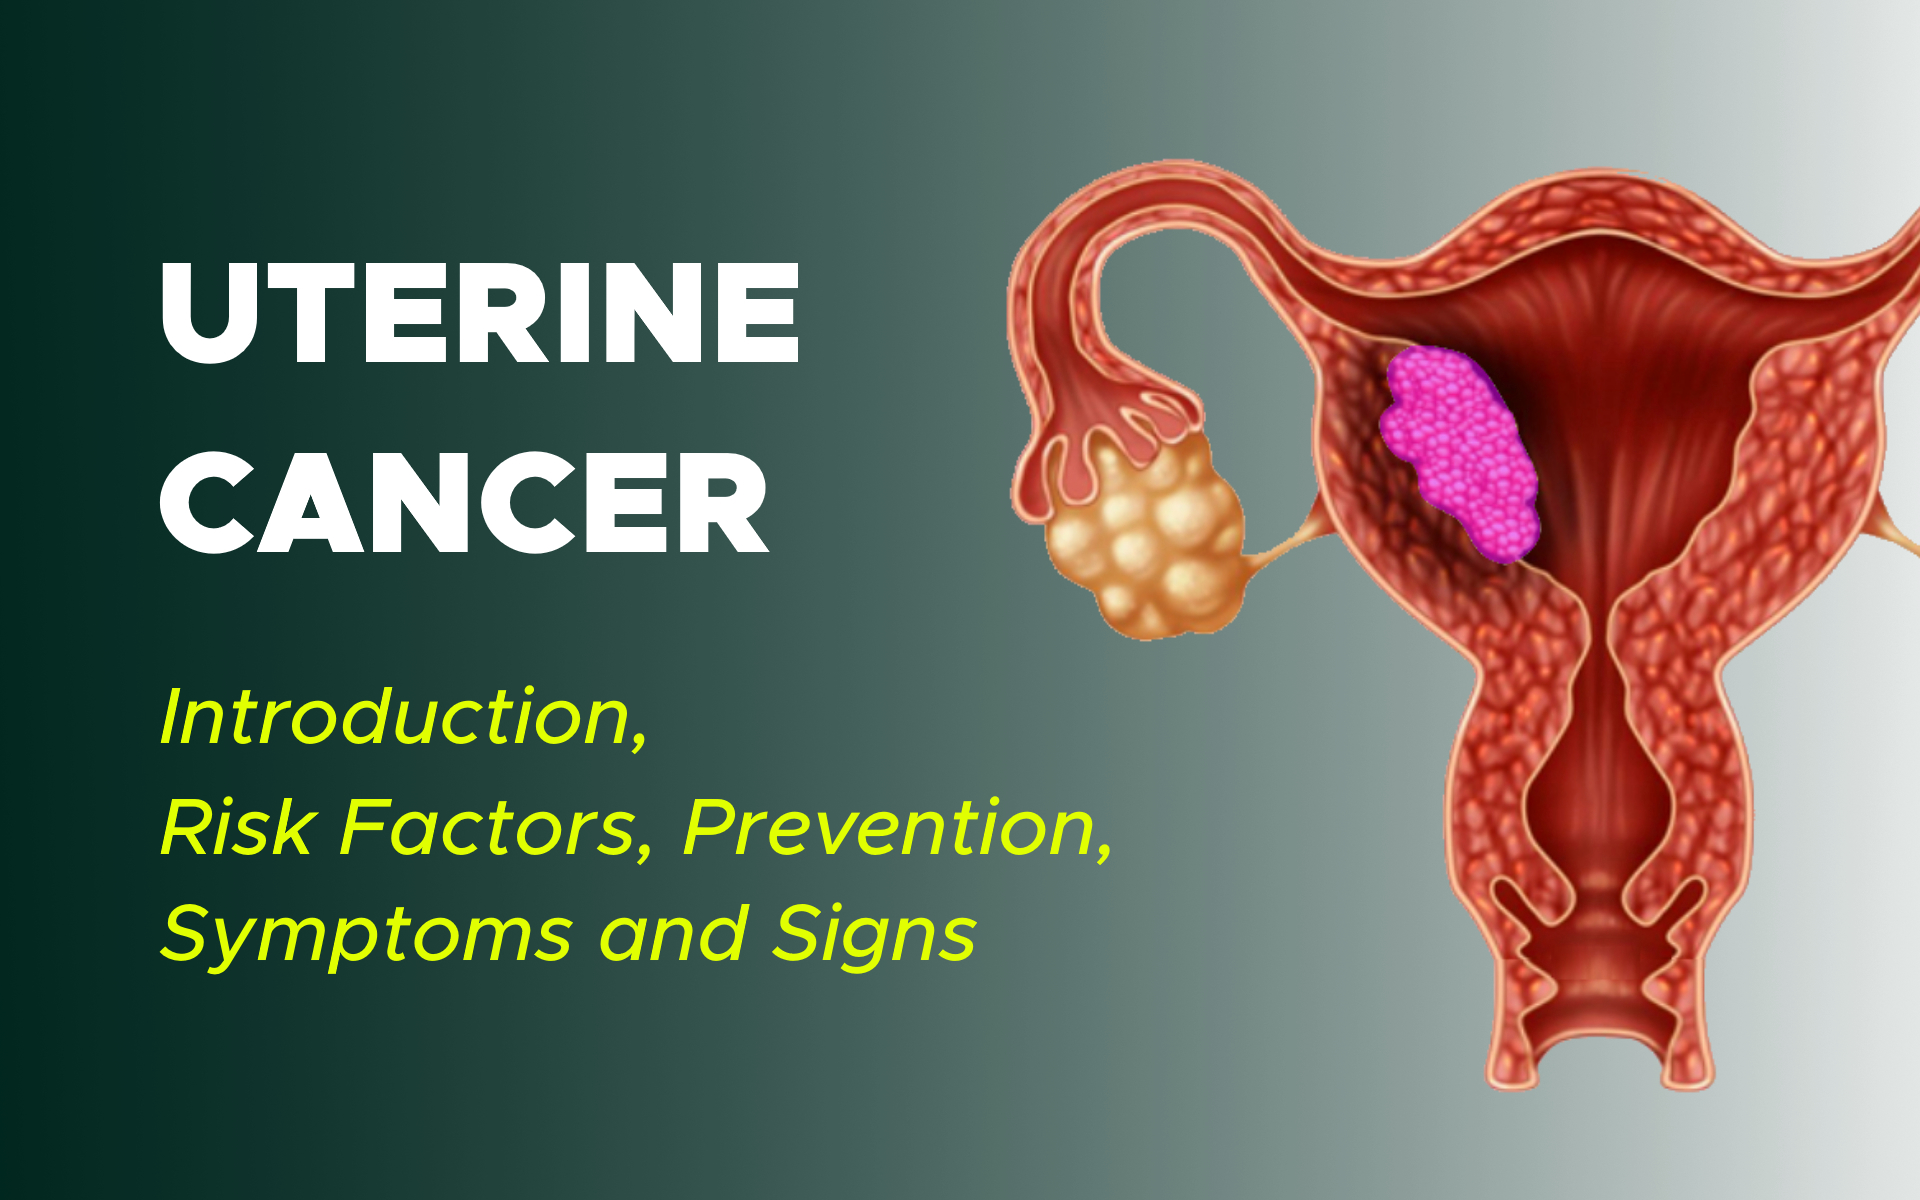 Uterine Cancer Introduction, Risk Factors, Prevention, Symptoms and Signs